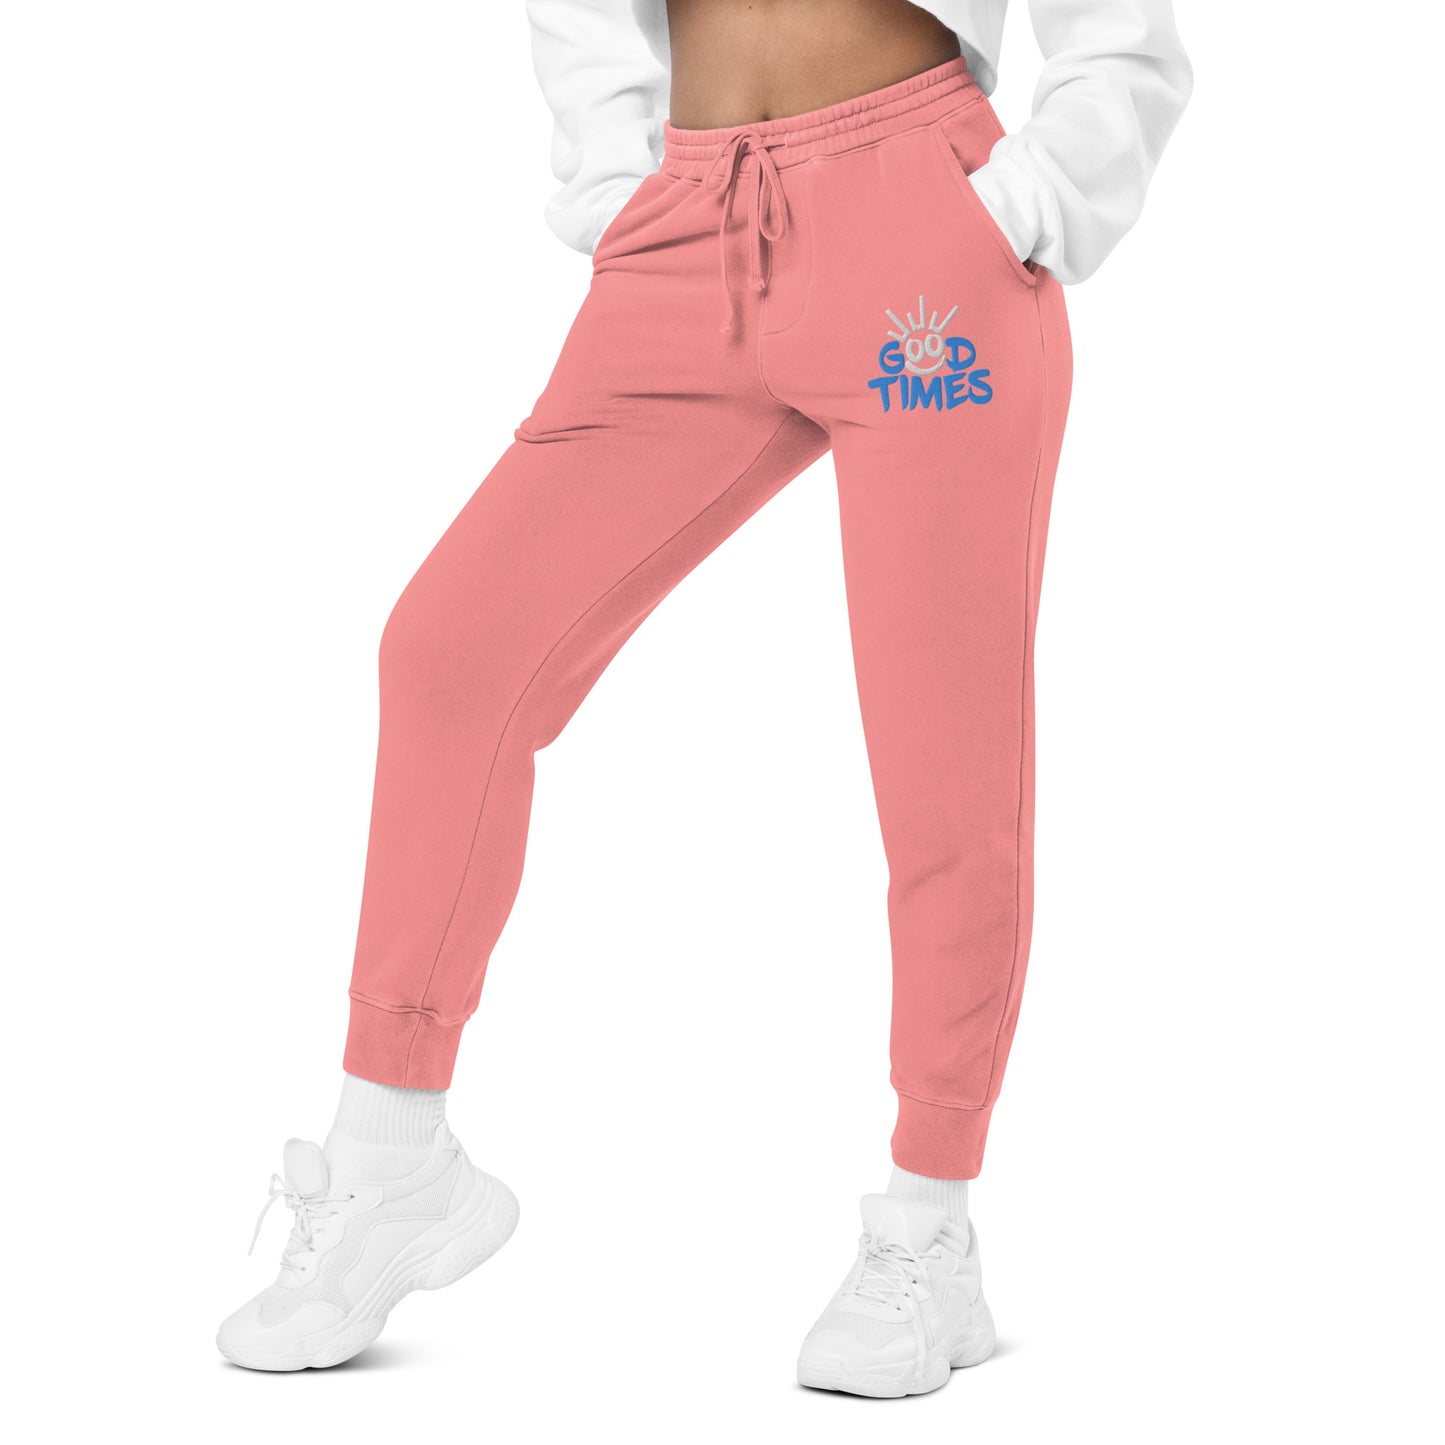 Good Times Unisex Embroidered Pigment-dyed Sweatpants